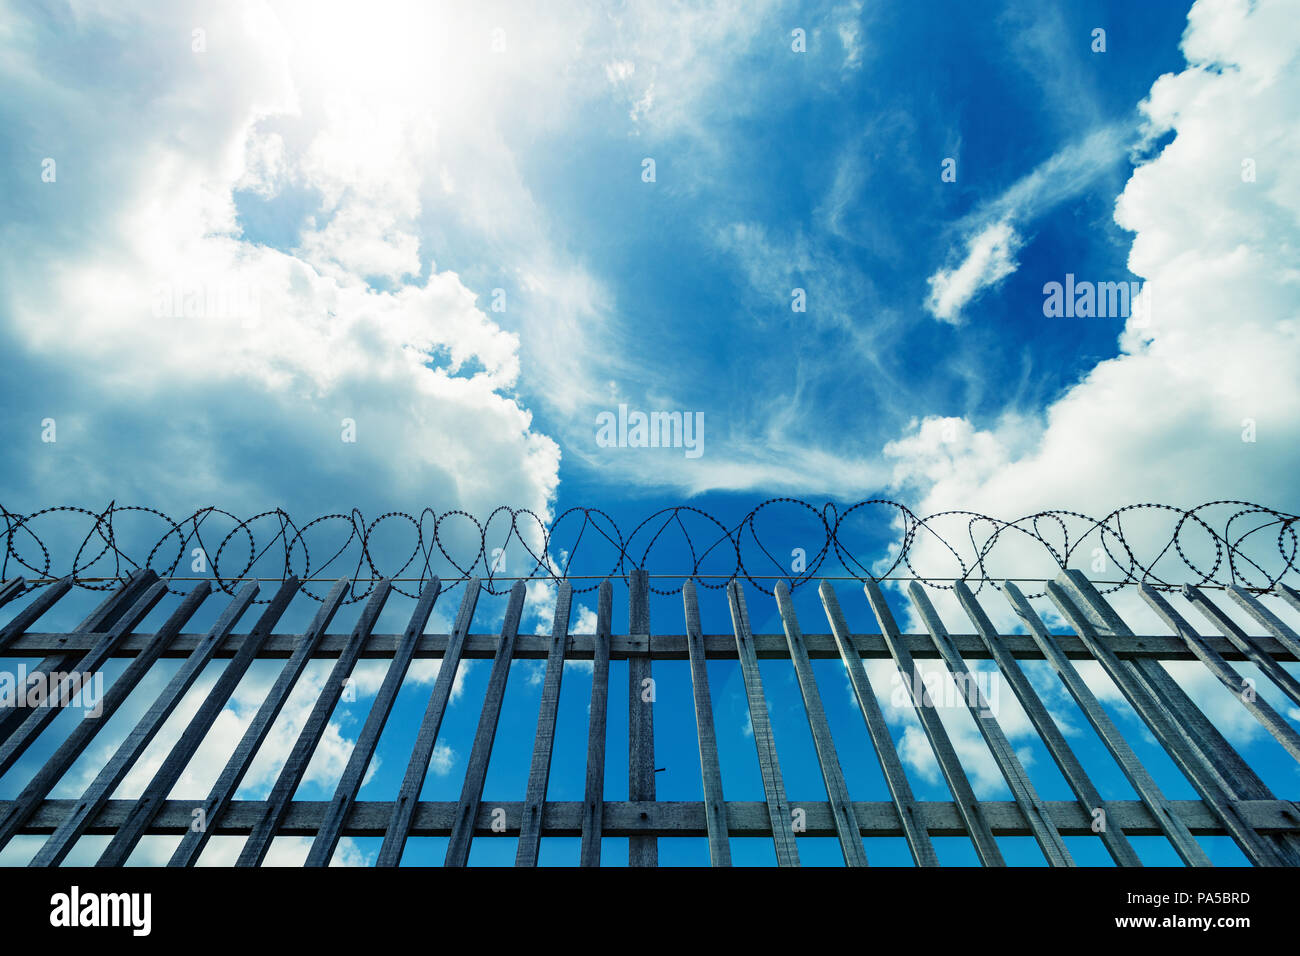 Barbed wire fence surrounding a prison , military or other high security complex. Stock Photo